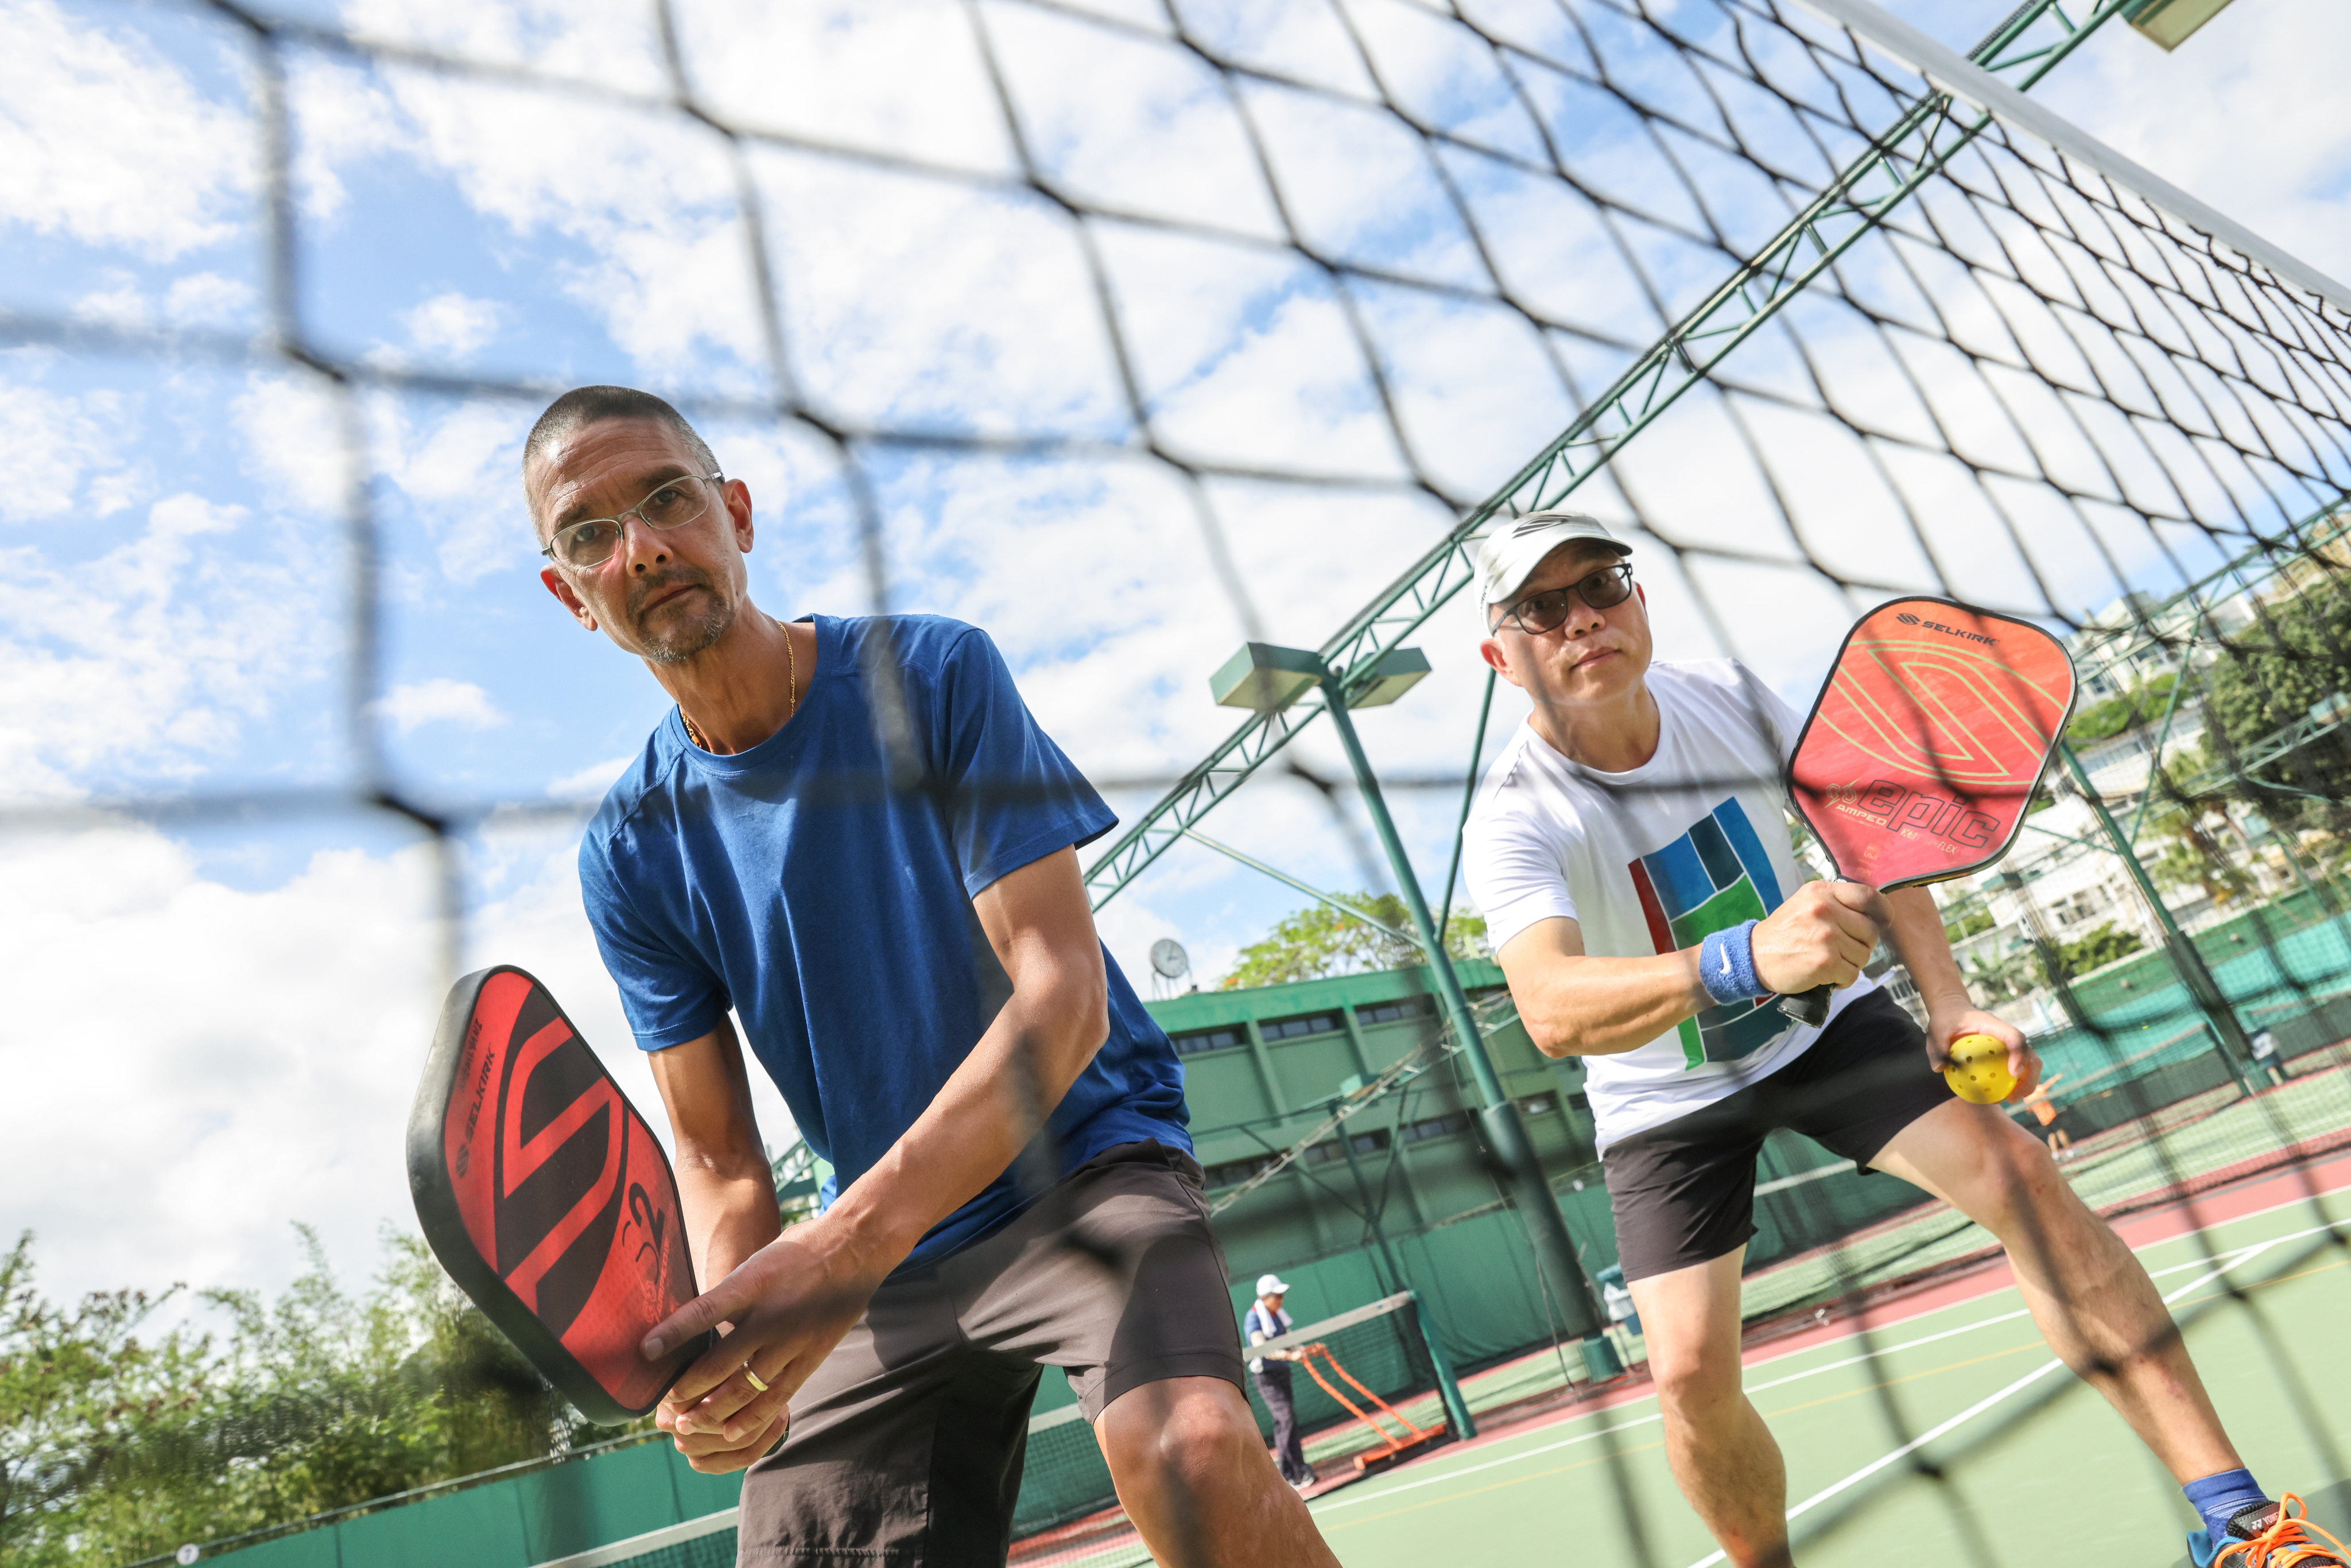  How Many Calories Do You Burn Playing Pickleball? Discover the Impact of this Fun Sport!